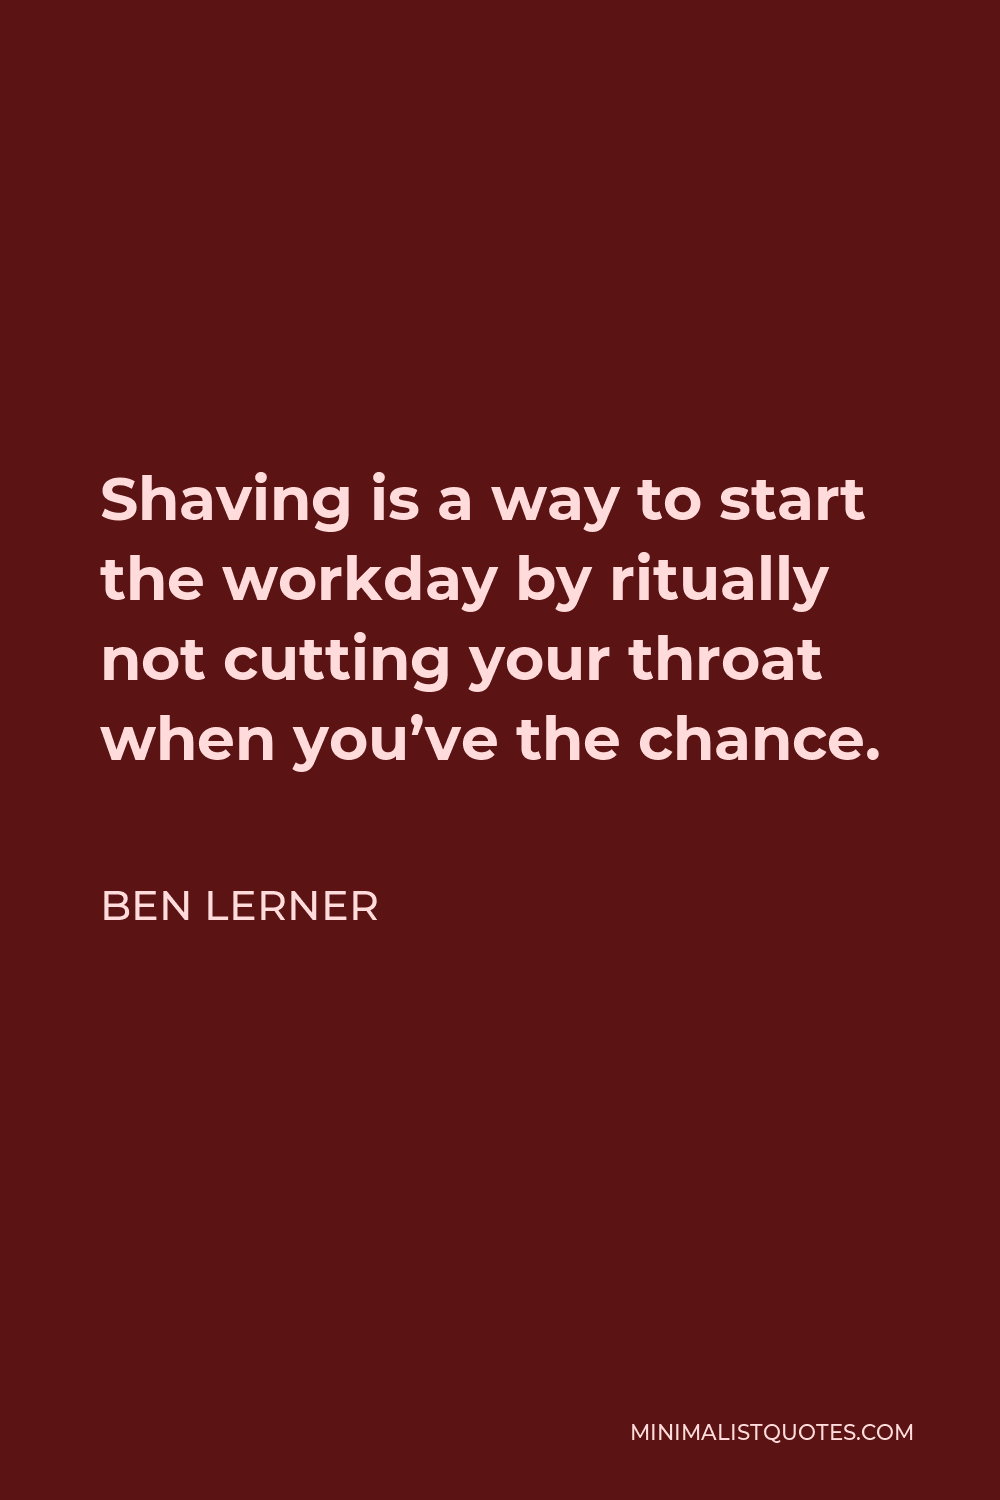 Ben Lerner Quote - Shaving is a way to start the workday by ritually not cutting your throat when you’ve the chance.